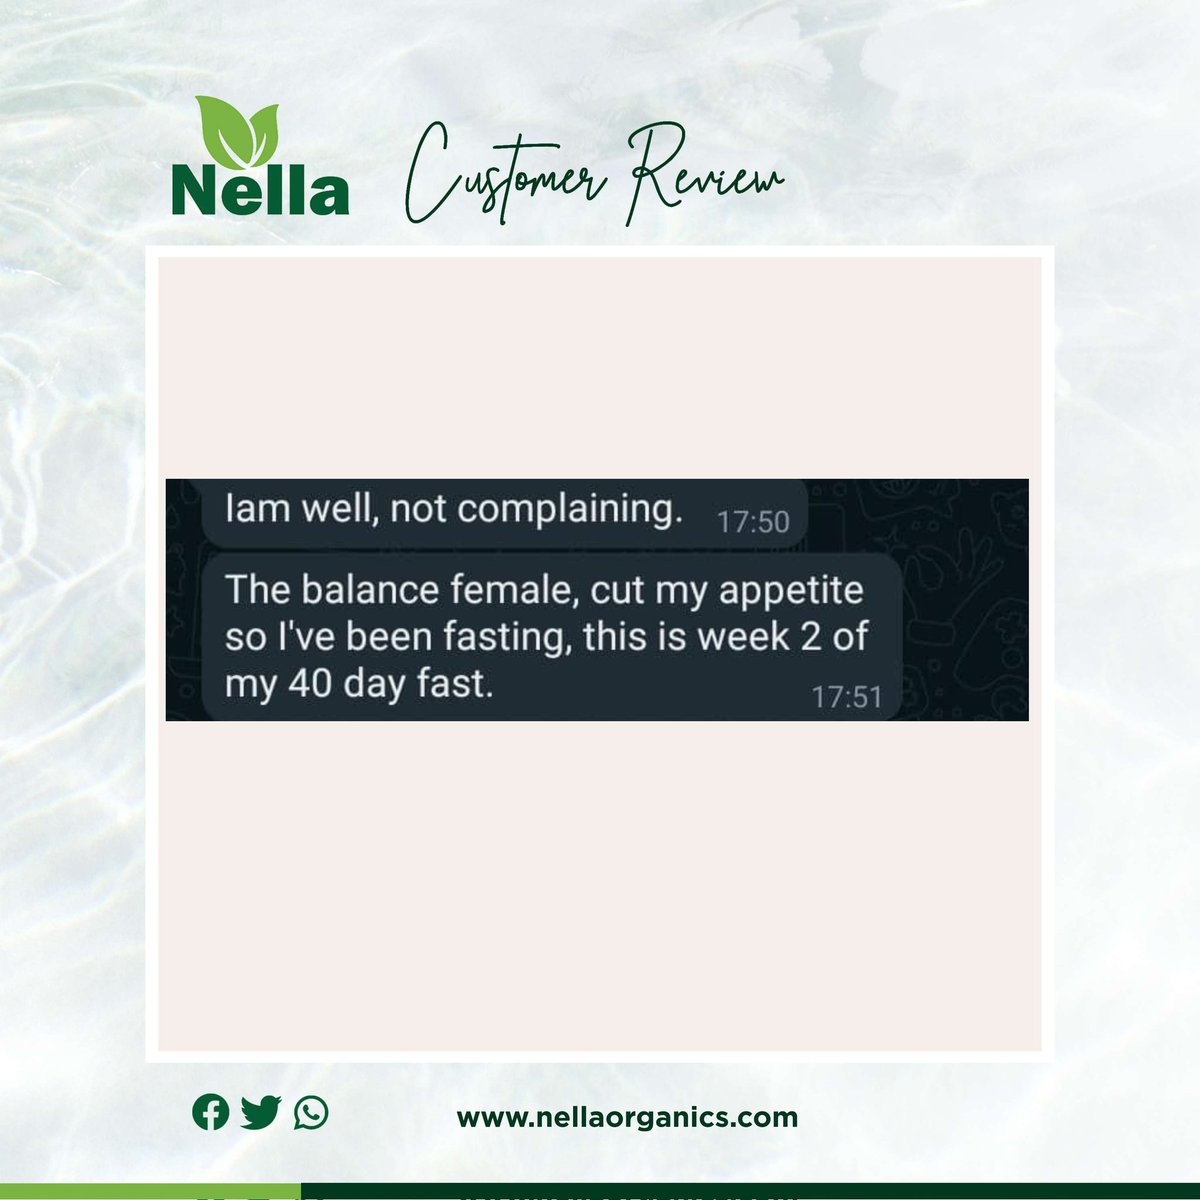 Struggling with cravings? Hormonal imbalance, stress and fatigue? 
The balanced female blend is made for women of all ages to provide nourishment and balance all month long. 
#NellaRevolution  #women #hormonalhealth